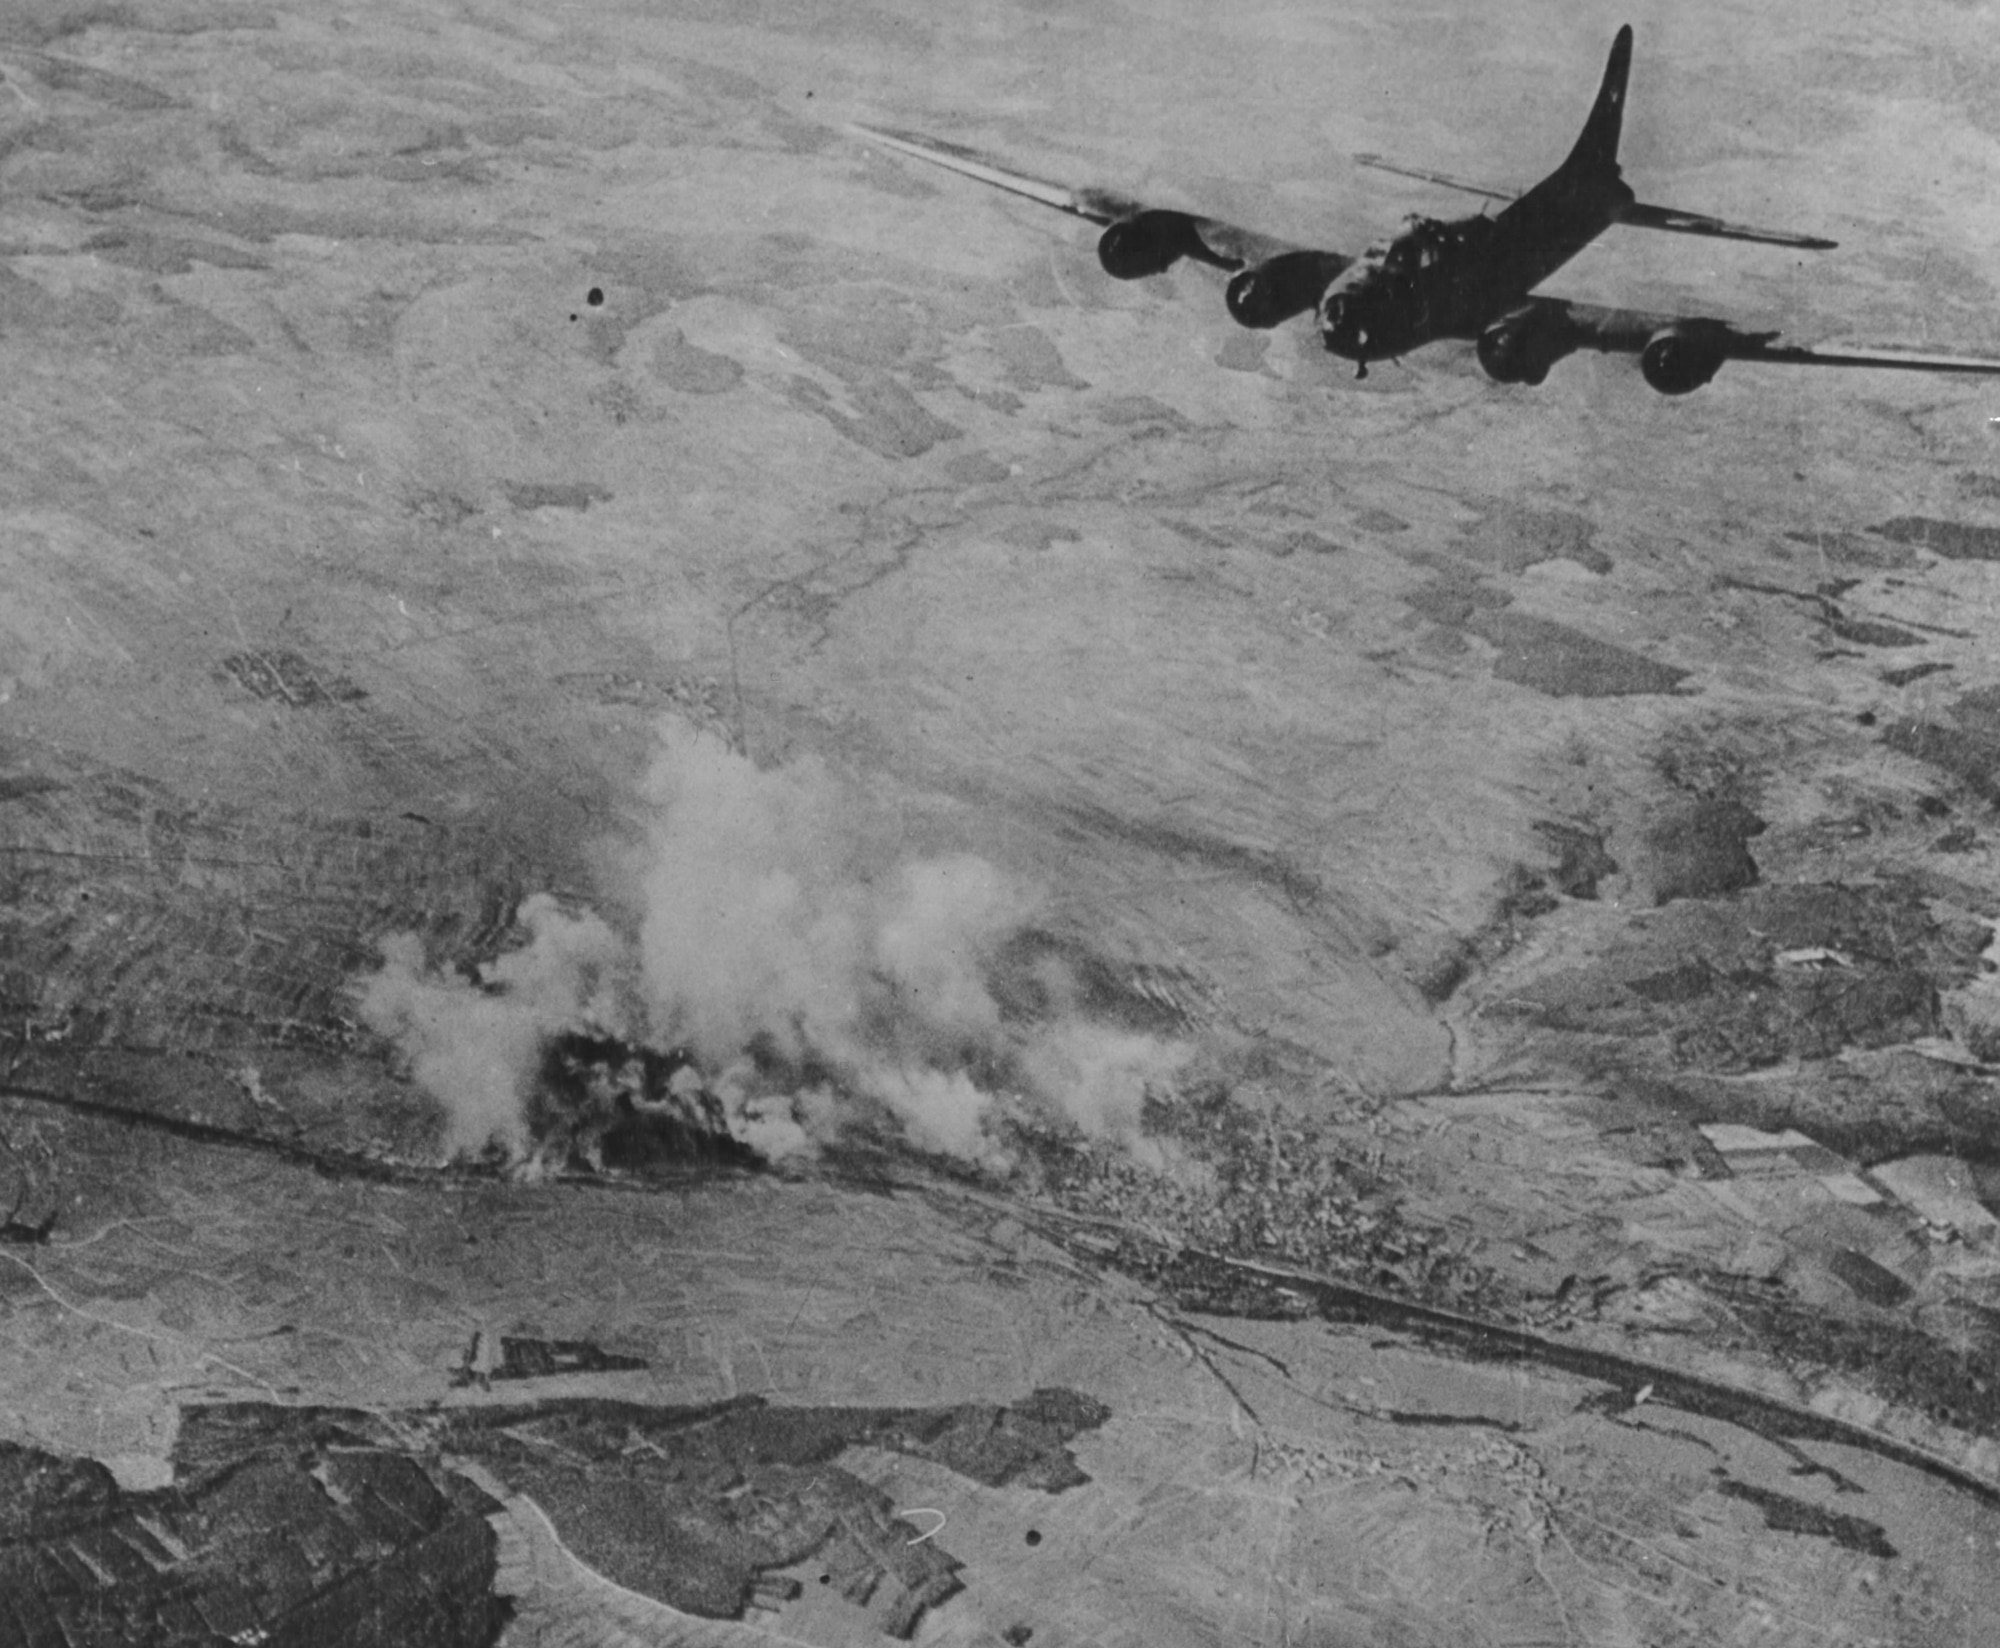 Schweinfurt in flames while a B-17 heads for home Black Thursday after bombing.